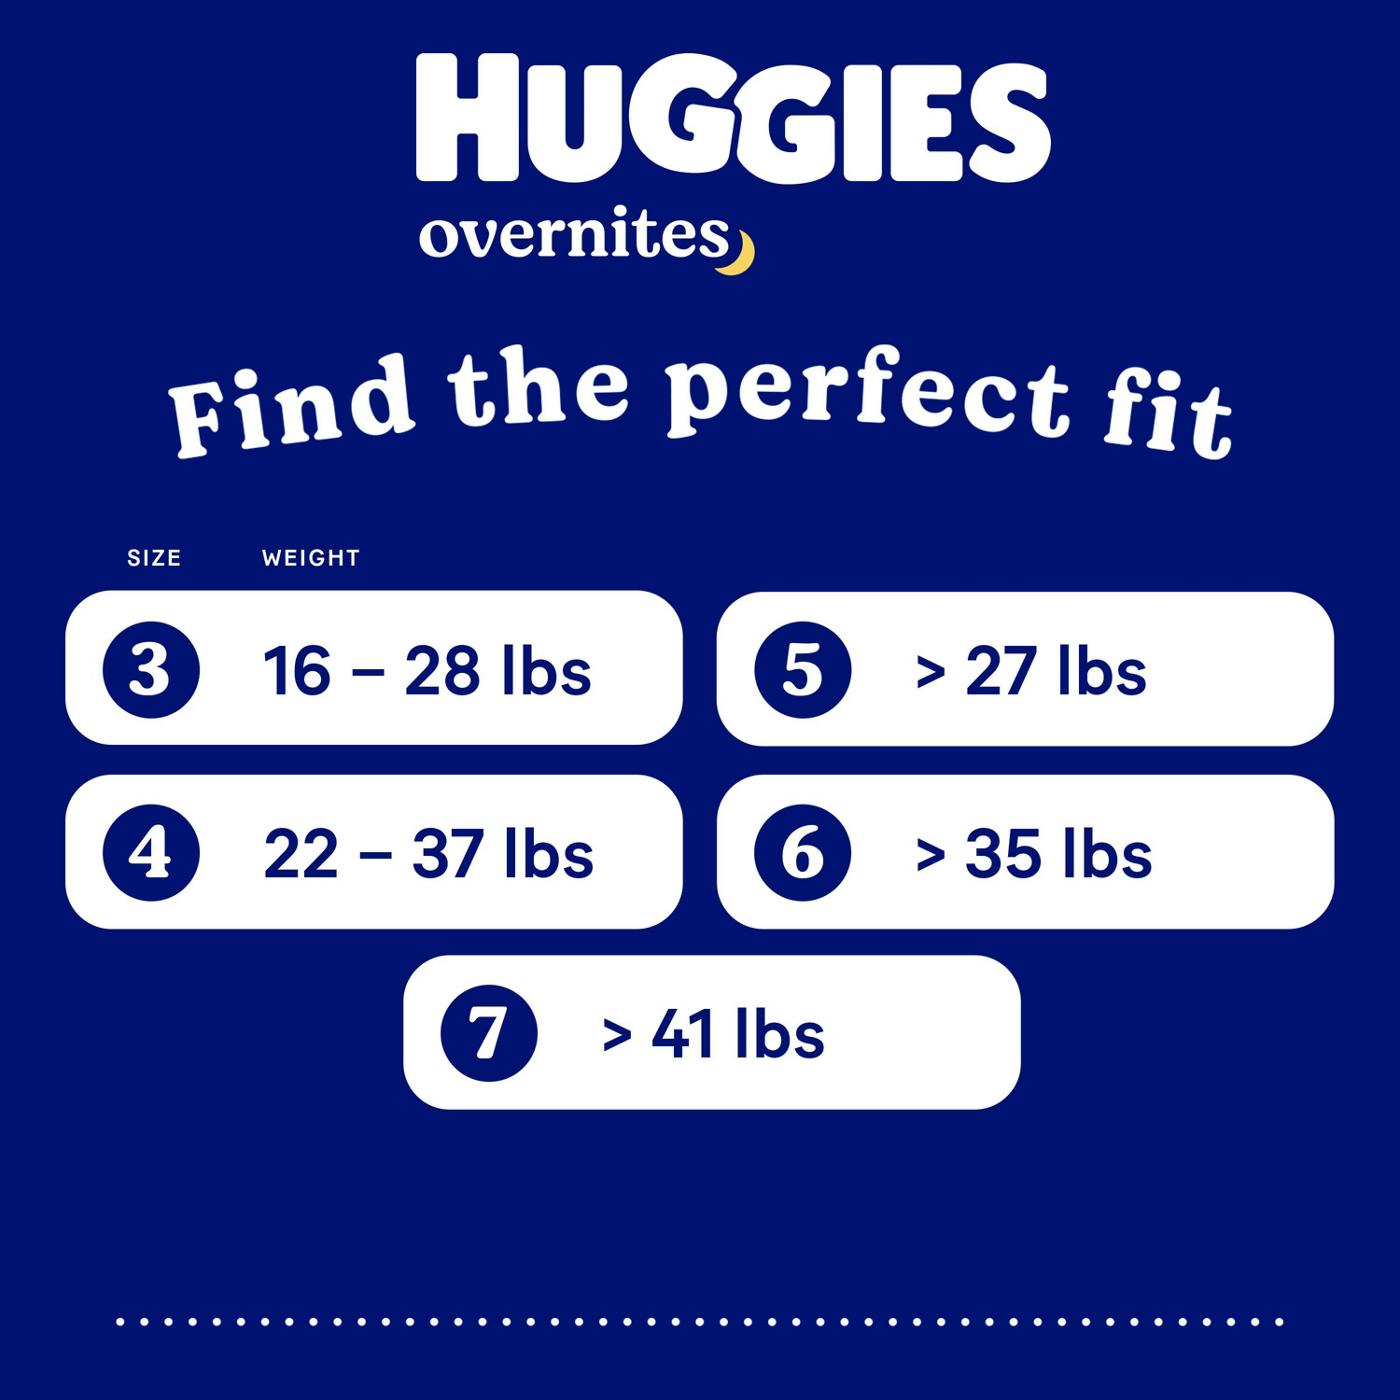 Huggies Overnites Nighttime Baby Diapers - Size 3; image 4 of 4